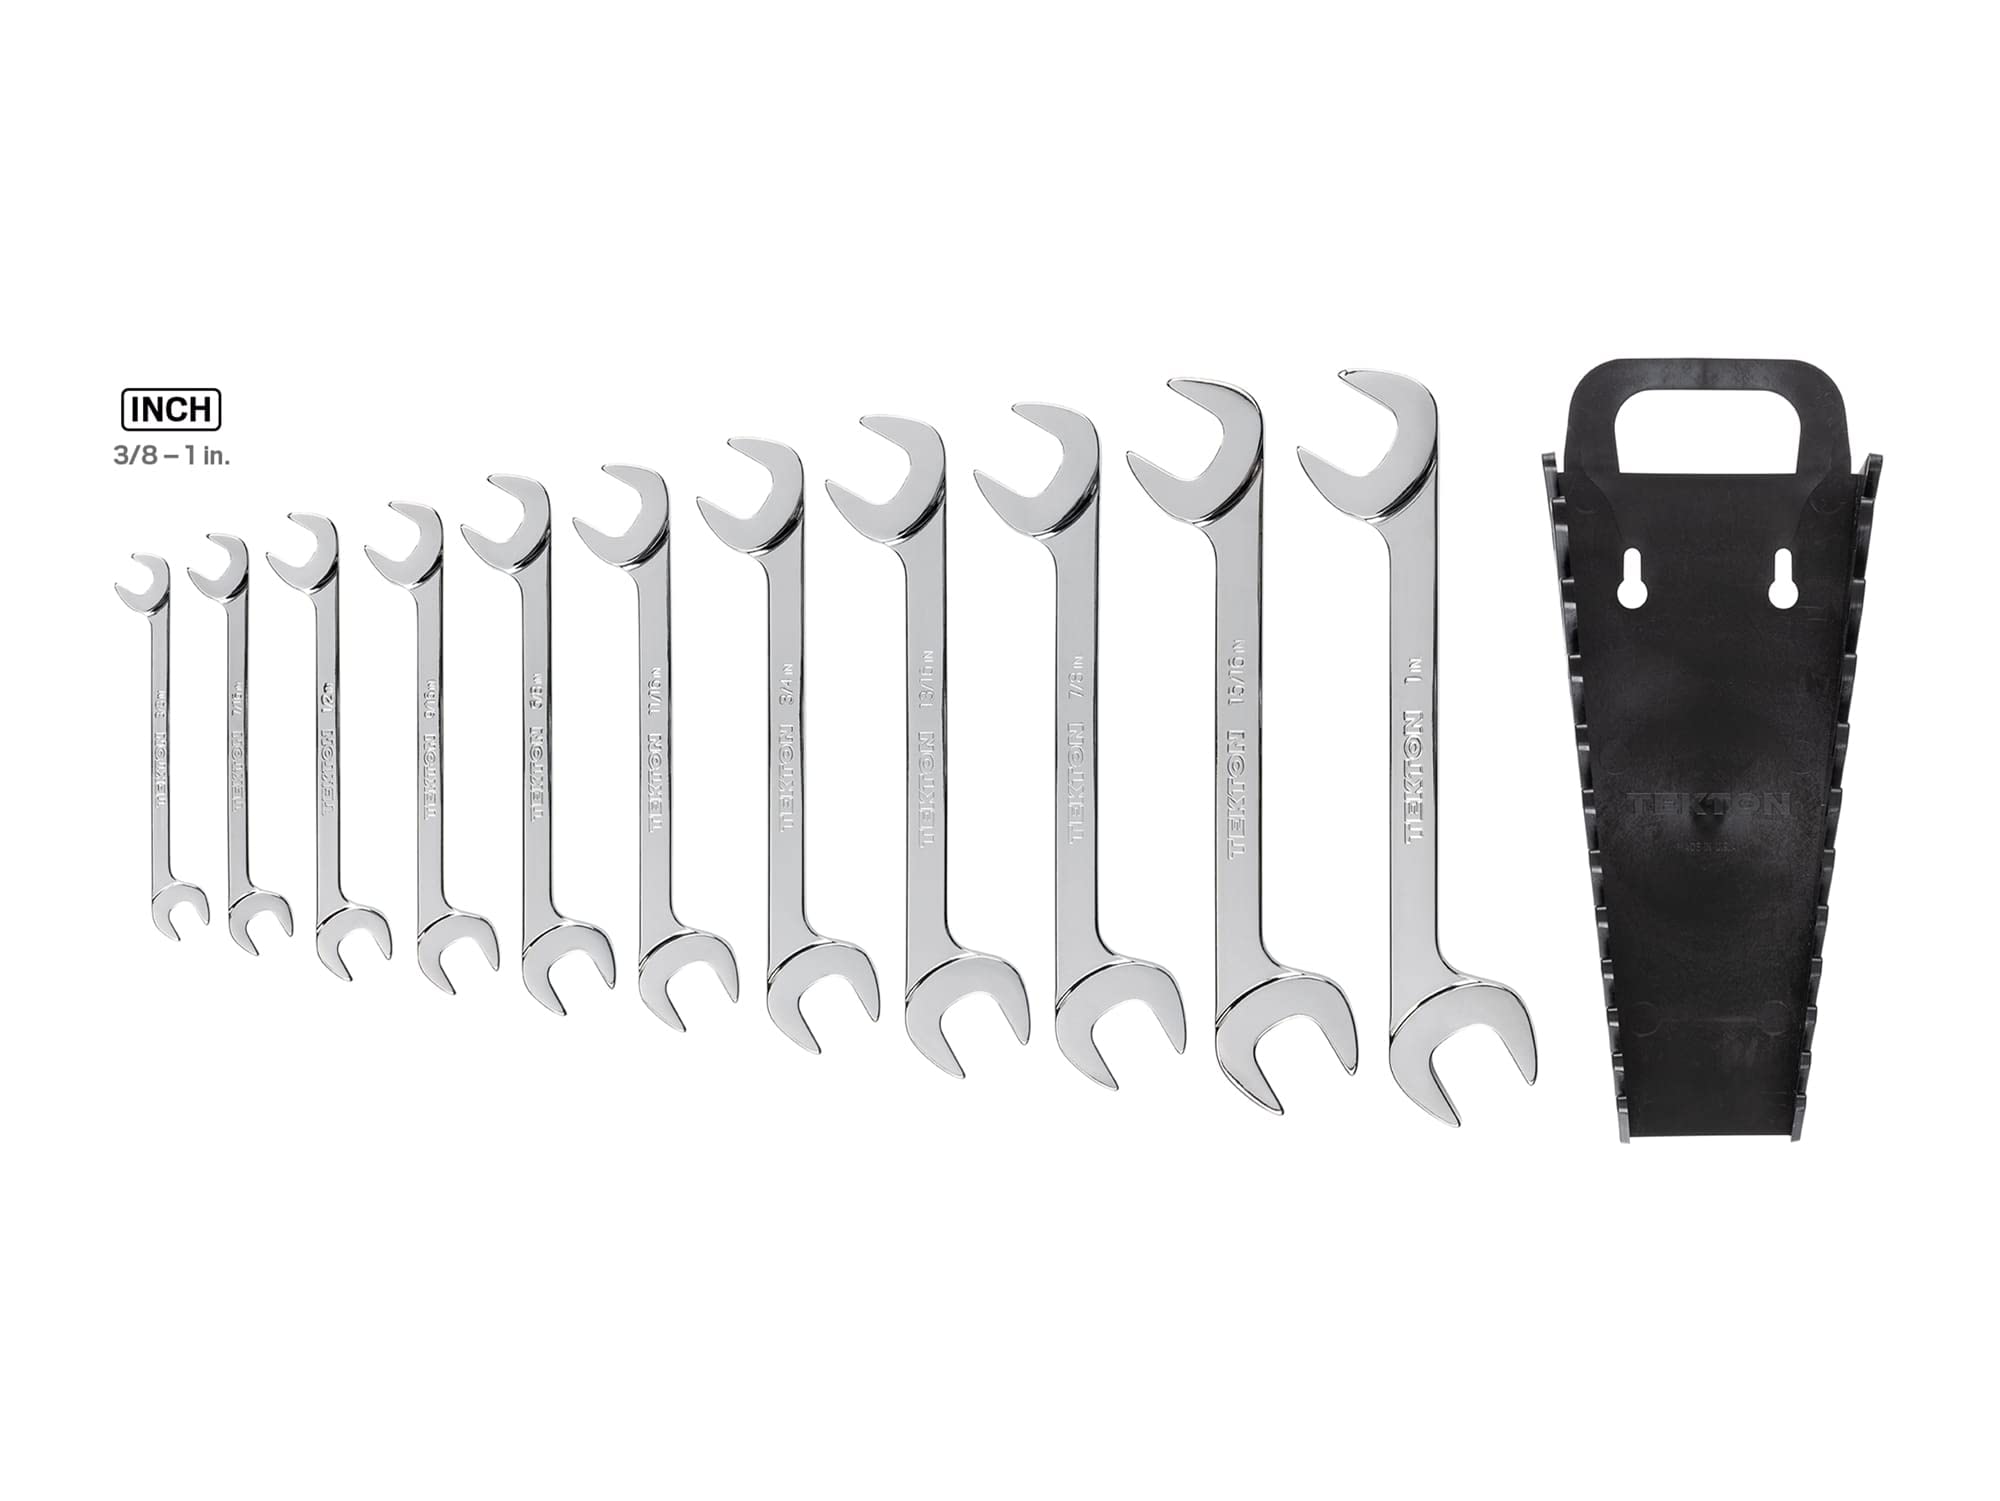 TEKTON Angle Head Open End Wrench Set with Holder, 11-Piece (3/8-1 in.) | WAE91102